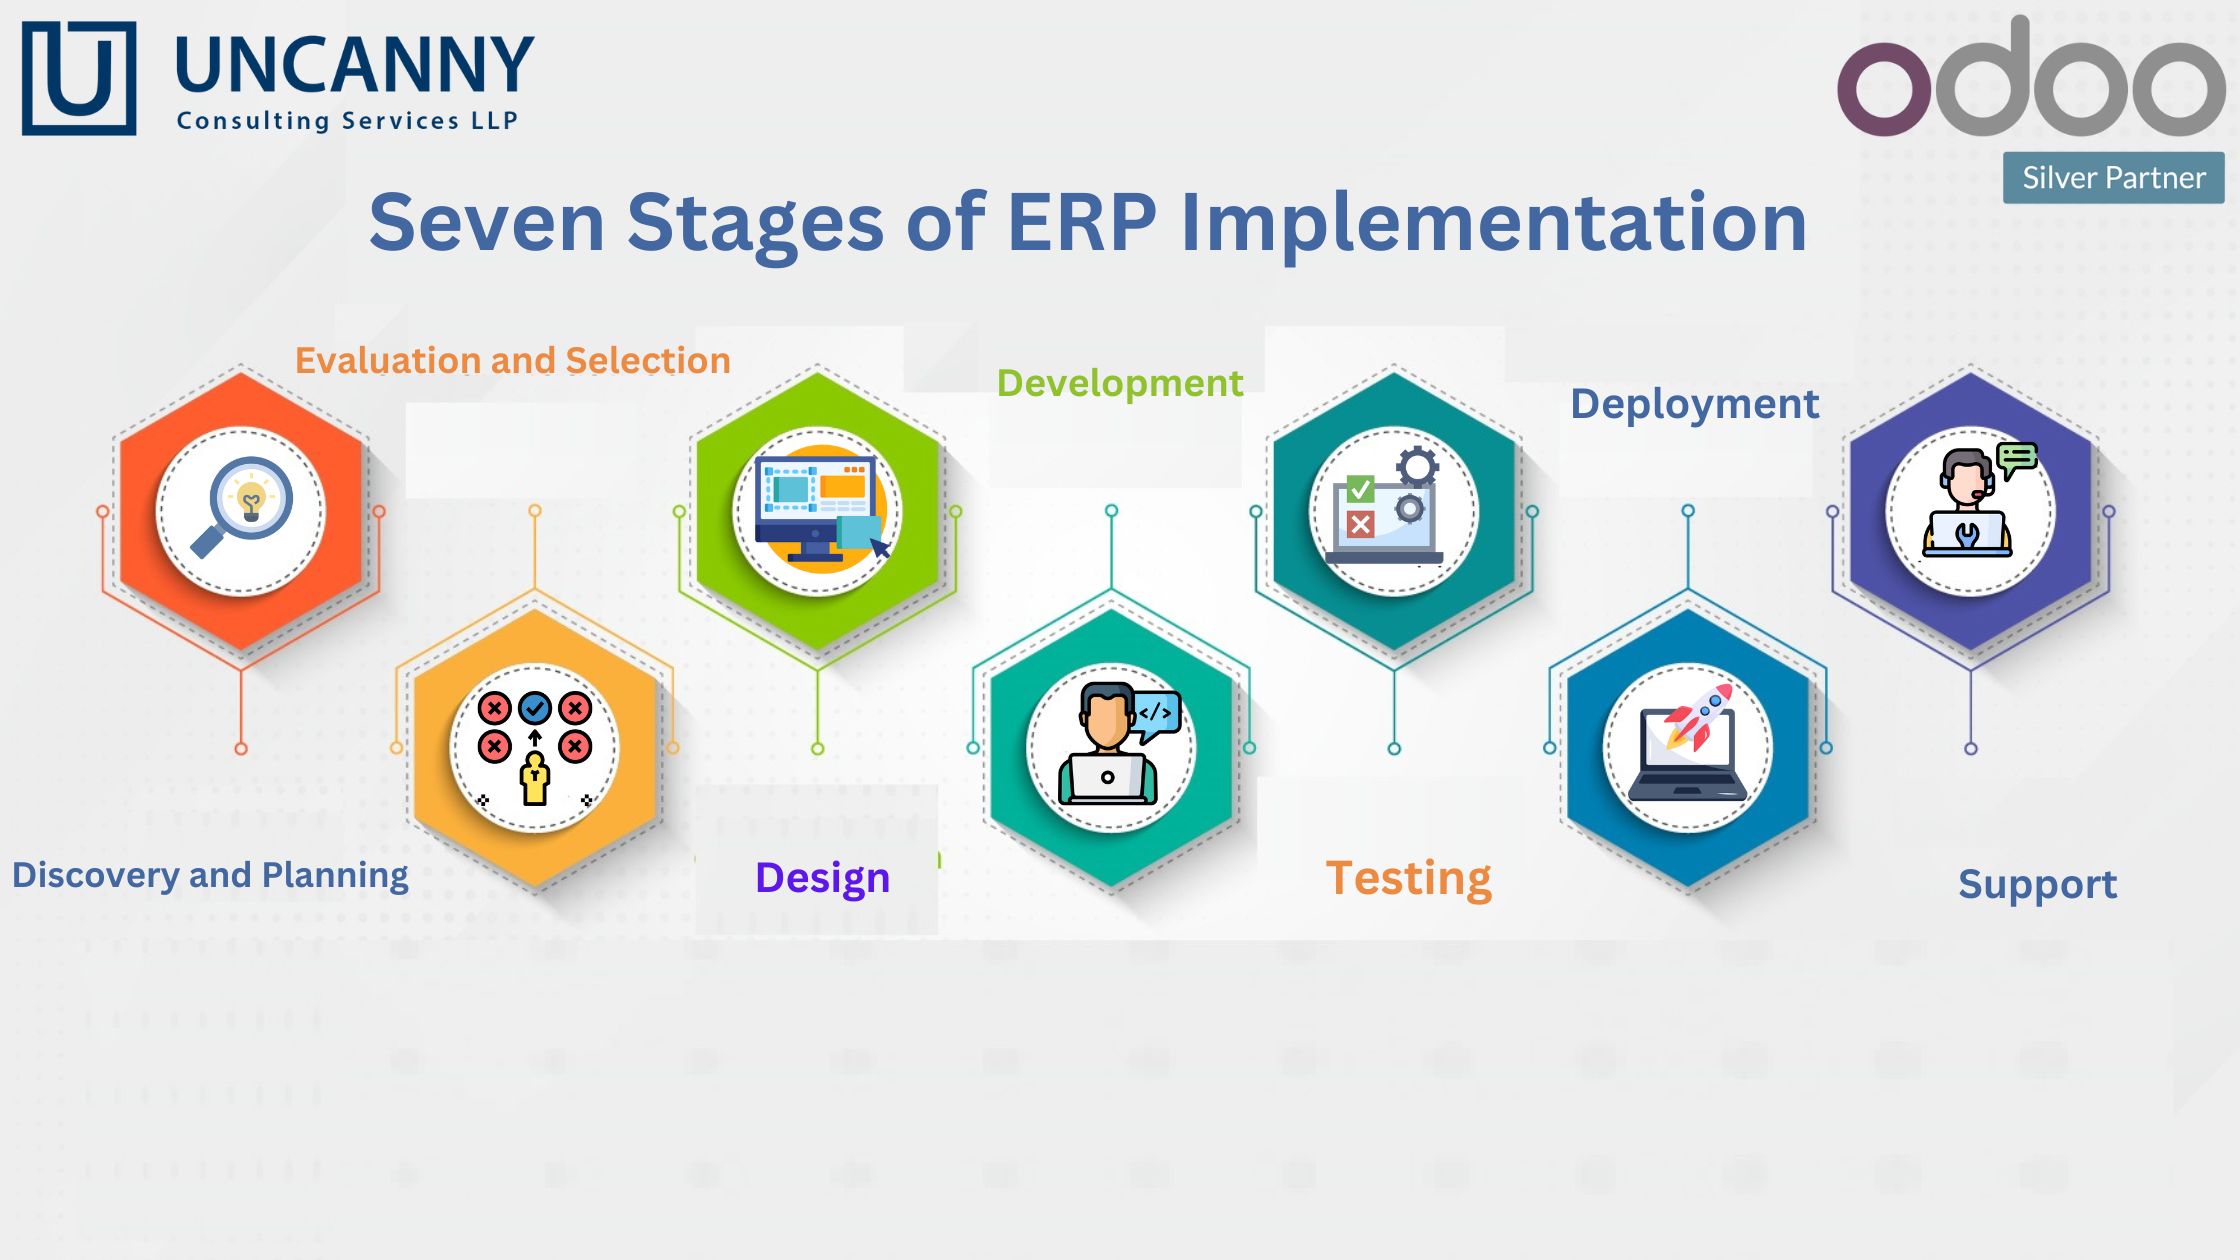 Seven Stages of ERP Implementation